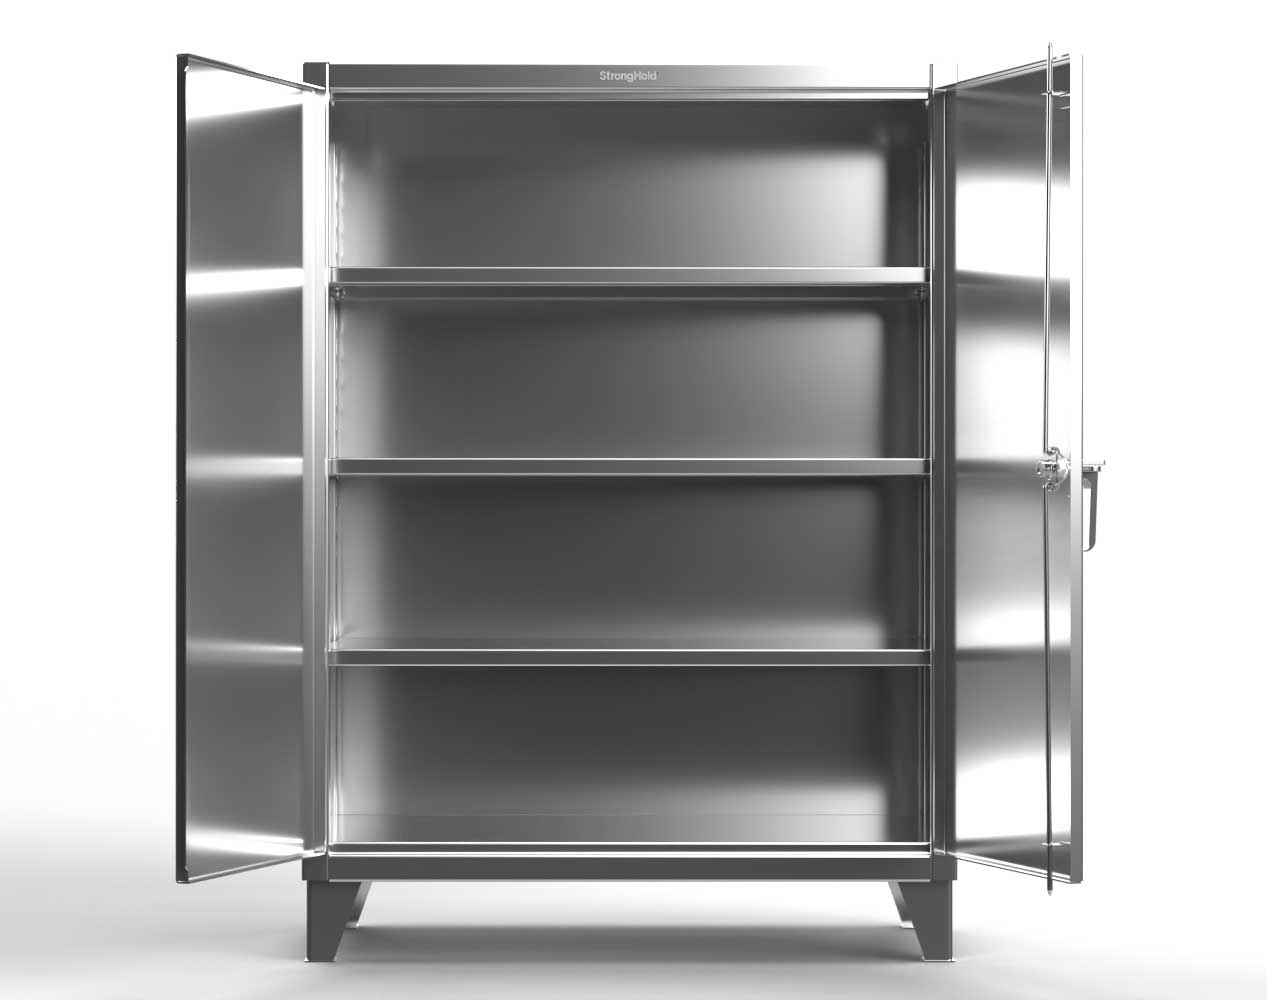 Extreme Duty 12 GA Stainless Steel Cabinet with 3 Shelves - 60 In. W x 24 In. D x 66 In. H